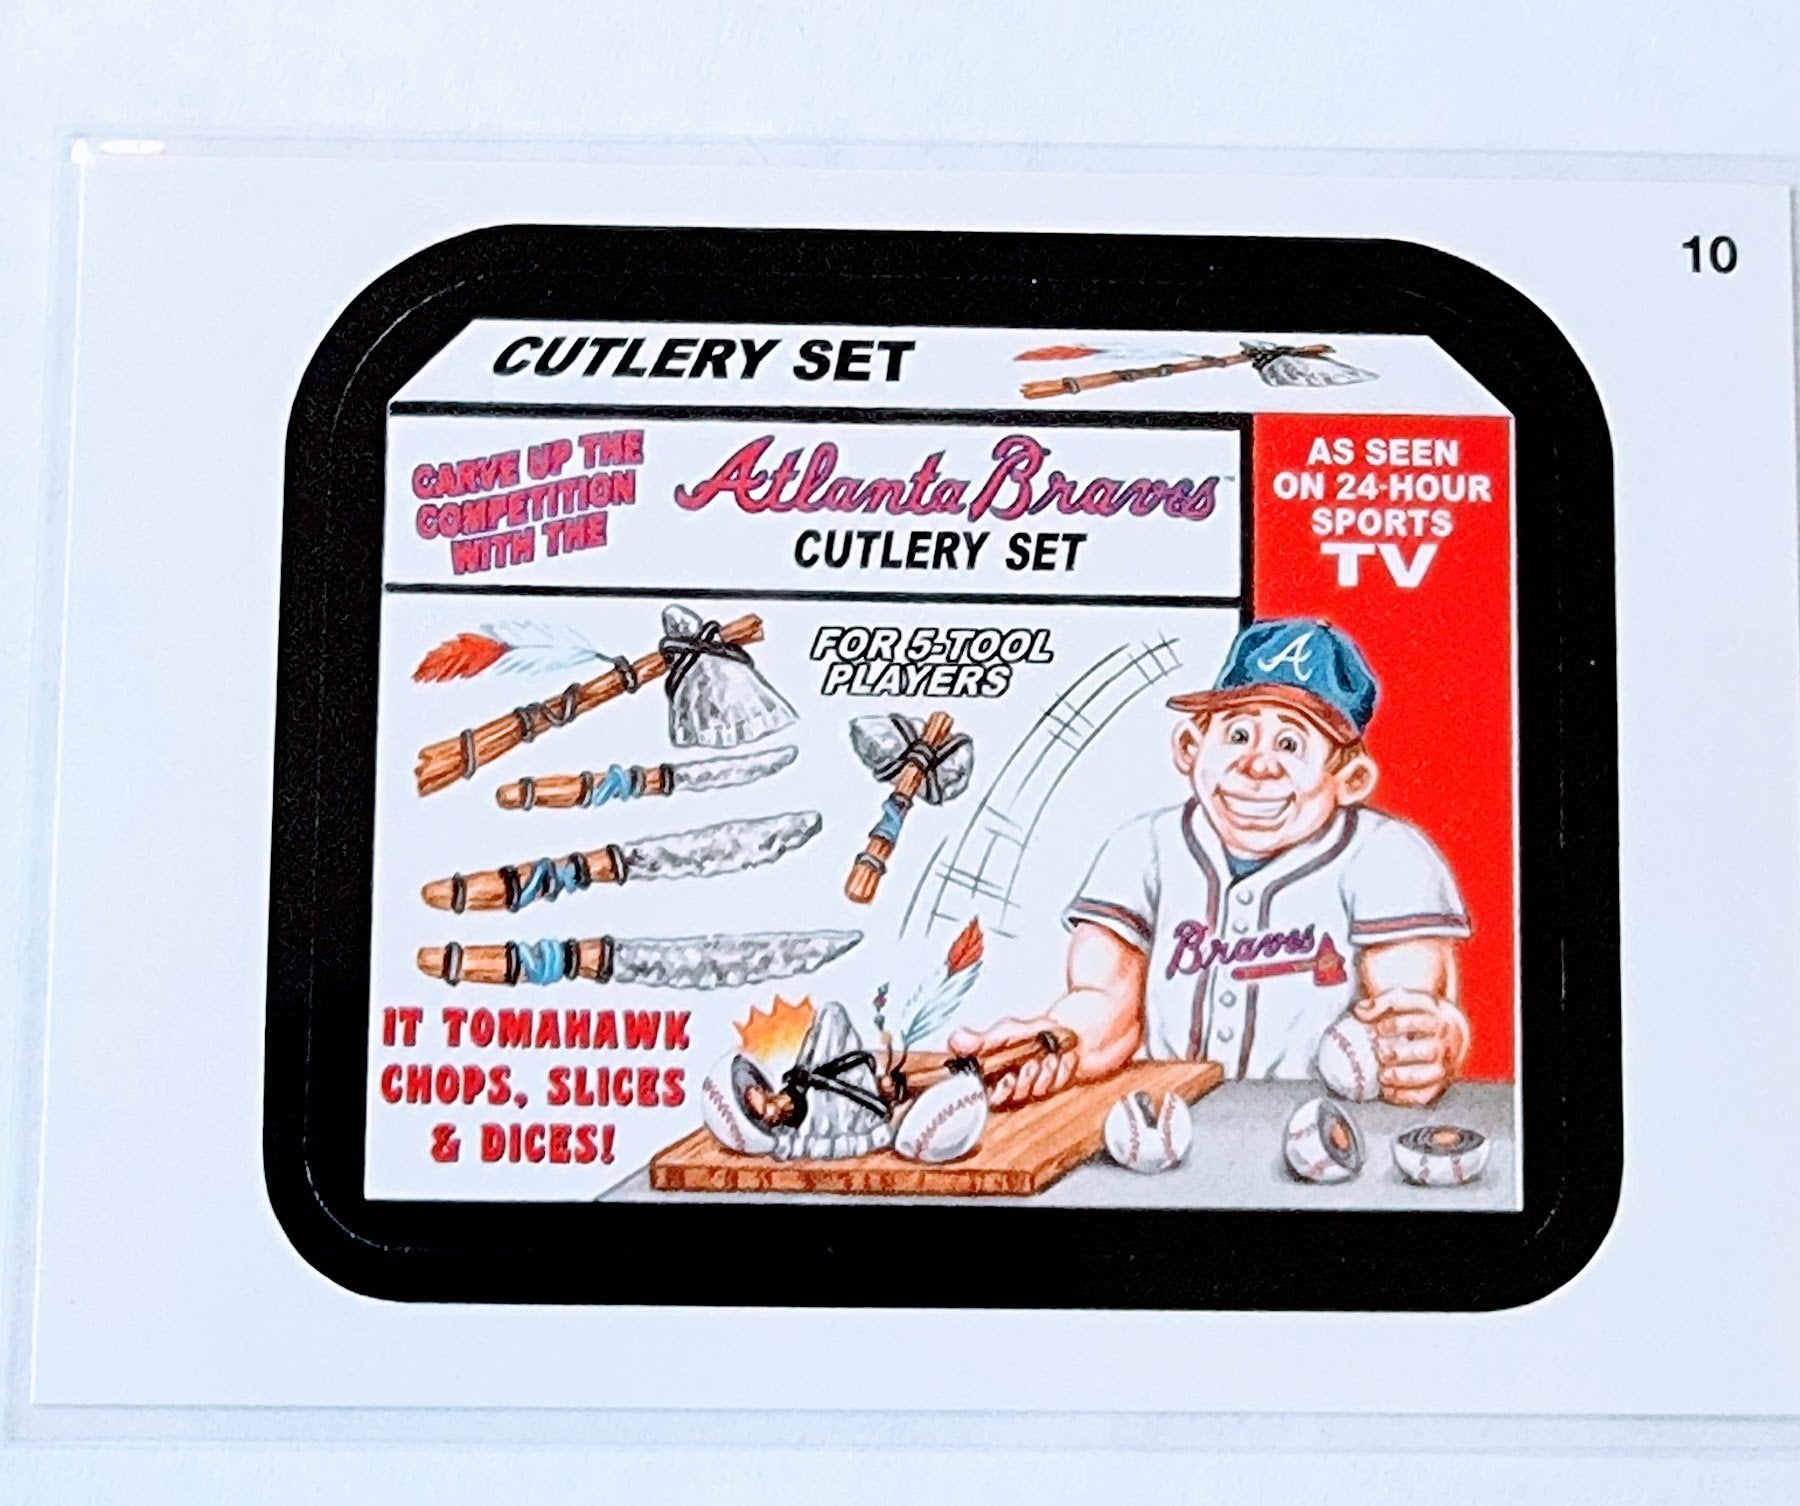 2016 Topps MLB Baseball Wacky Packages Atlanta Braves Cutlery Set Sticker Trading Card MCSC1 simple Xclusive Collectibles   